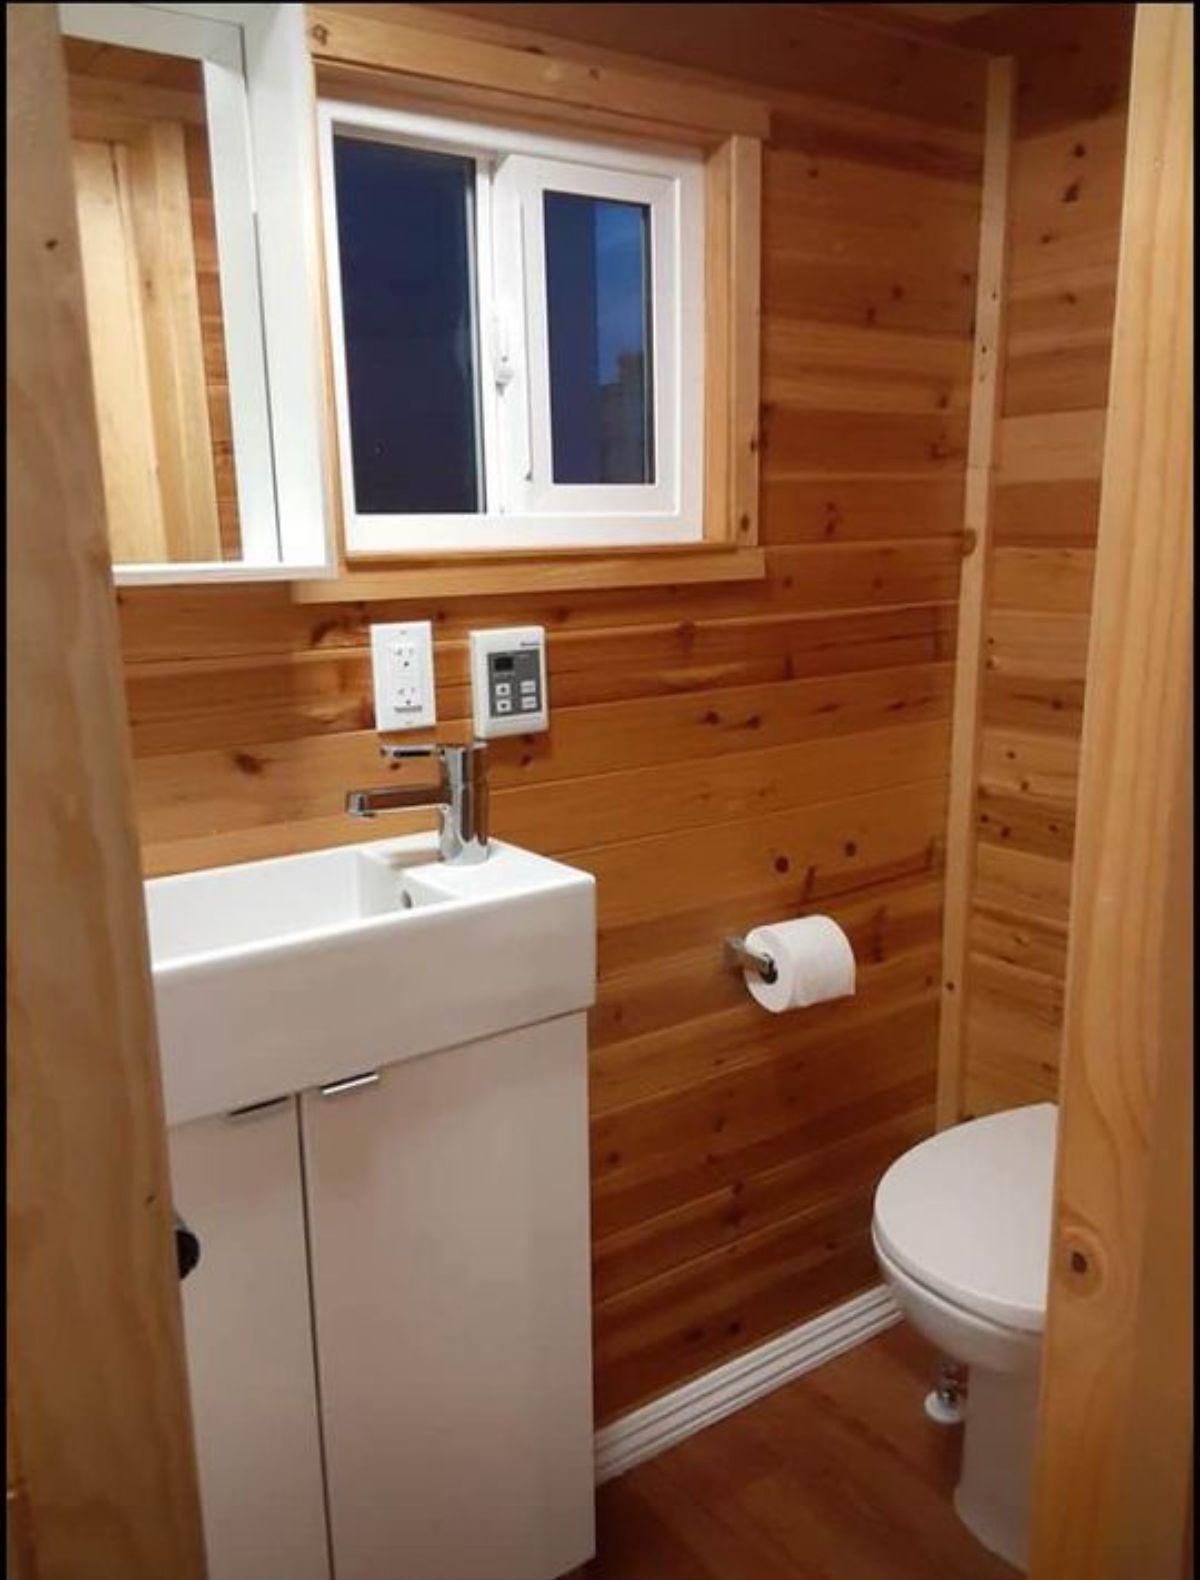 Electric points in bathroom of 18' Tiny Home